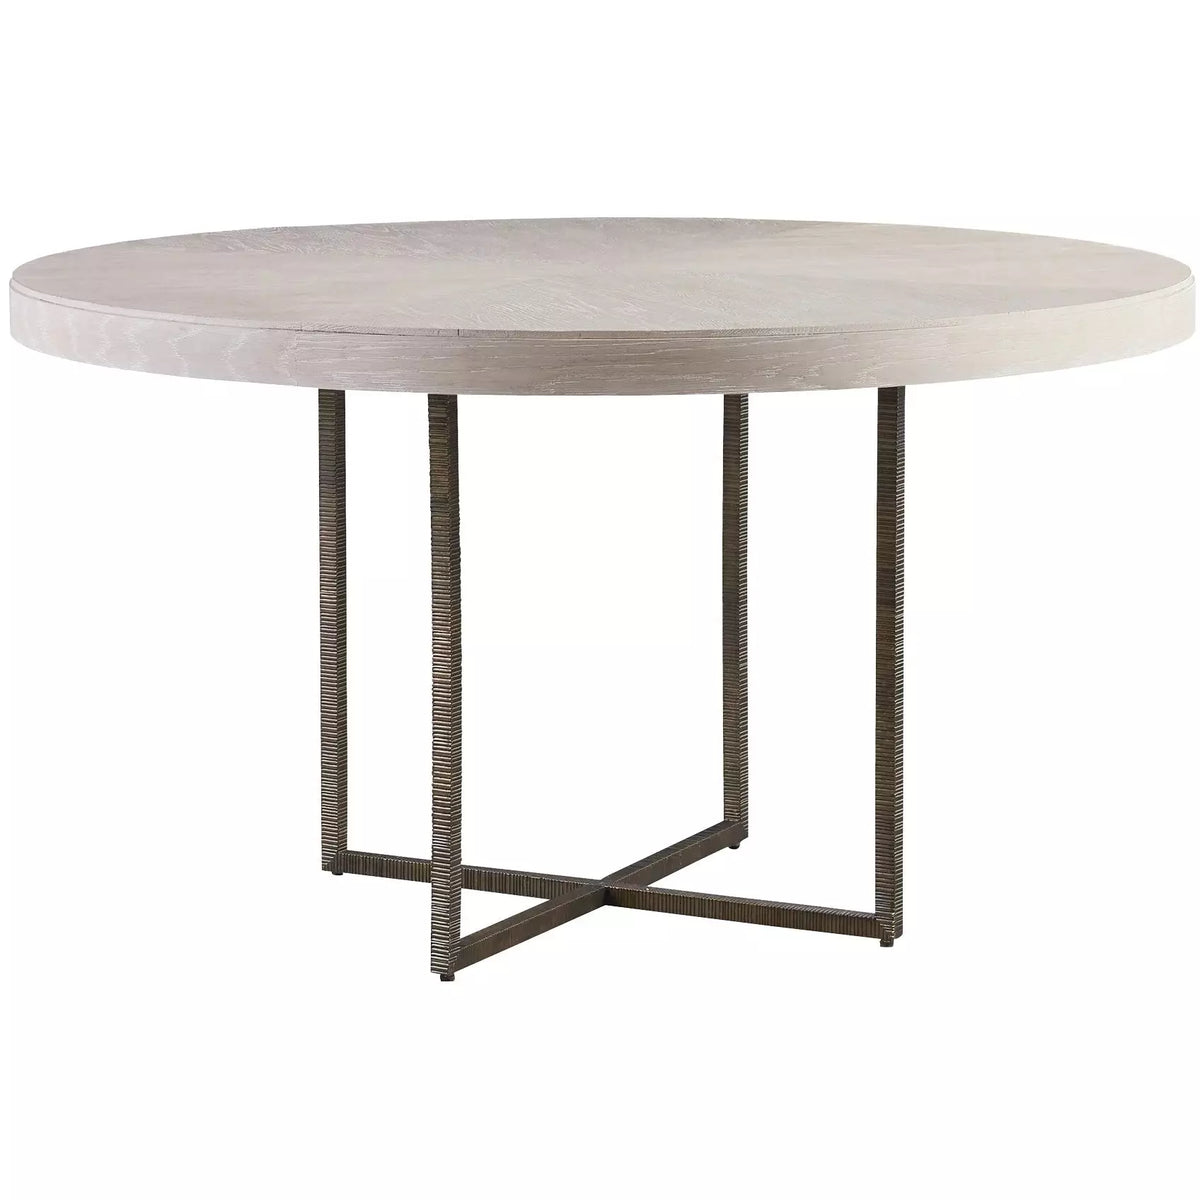 Robards Round Dining Table - Be Bold Furniture